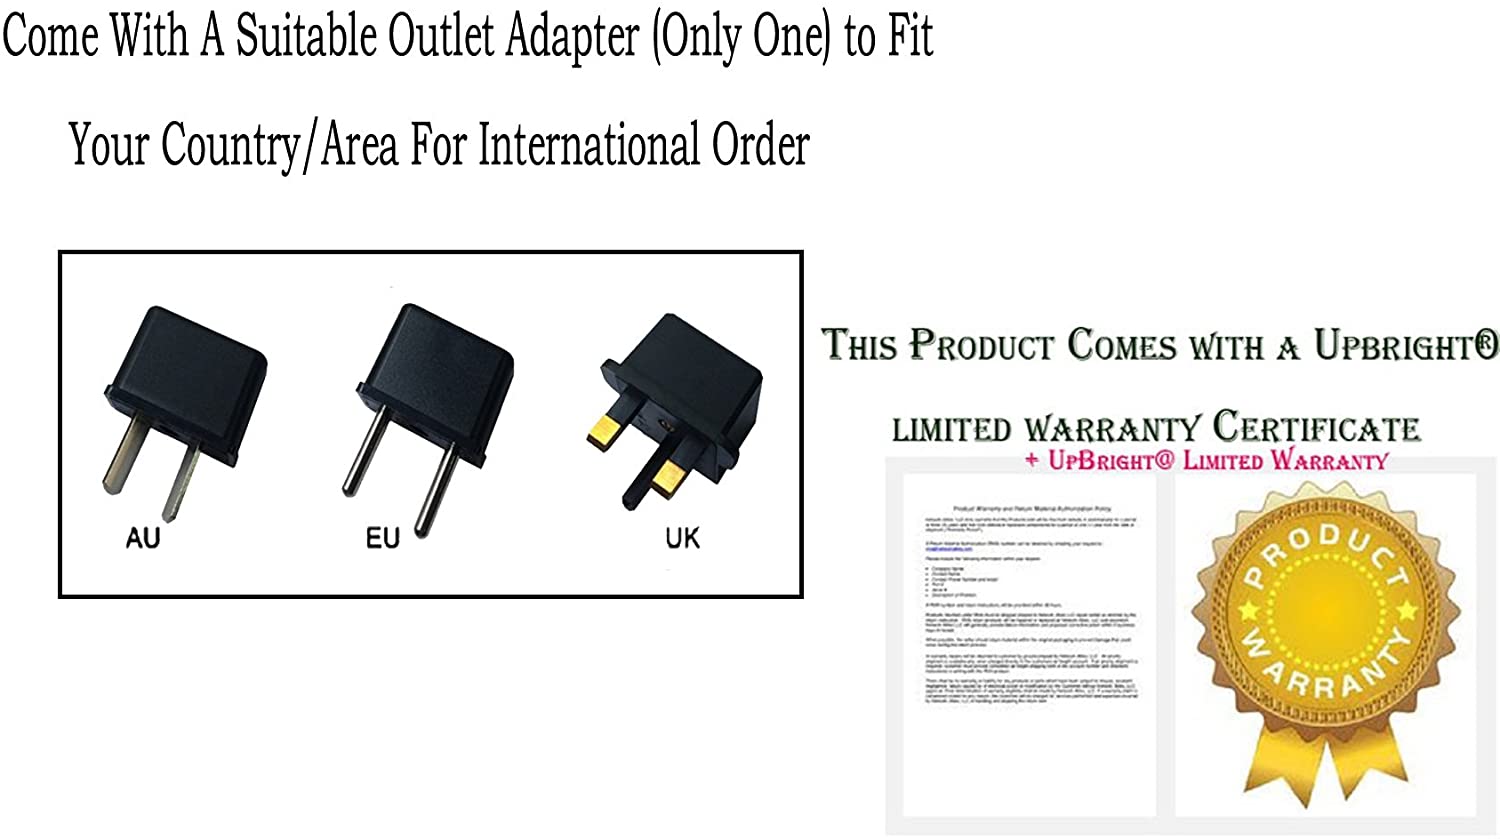 UPBRIGHT NEW Global AC / DC Adapter For QNAP TS-453A-4G-US TS-453A-8G-US Trubo NAS TS-453A TS453A NAS Server Power Supply Cord Cable PS Charger PSU - image 4 of 5